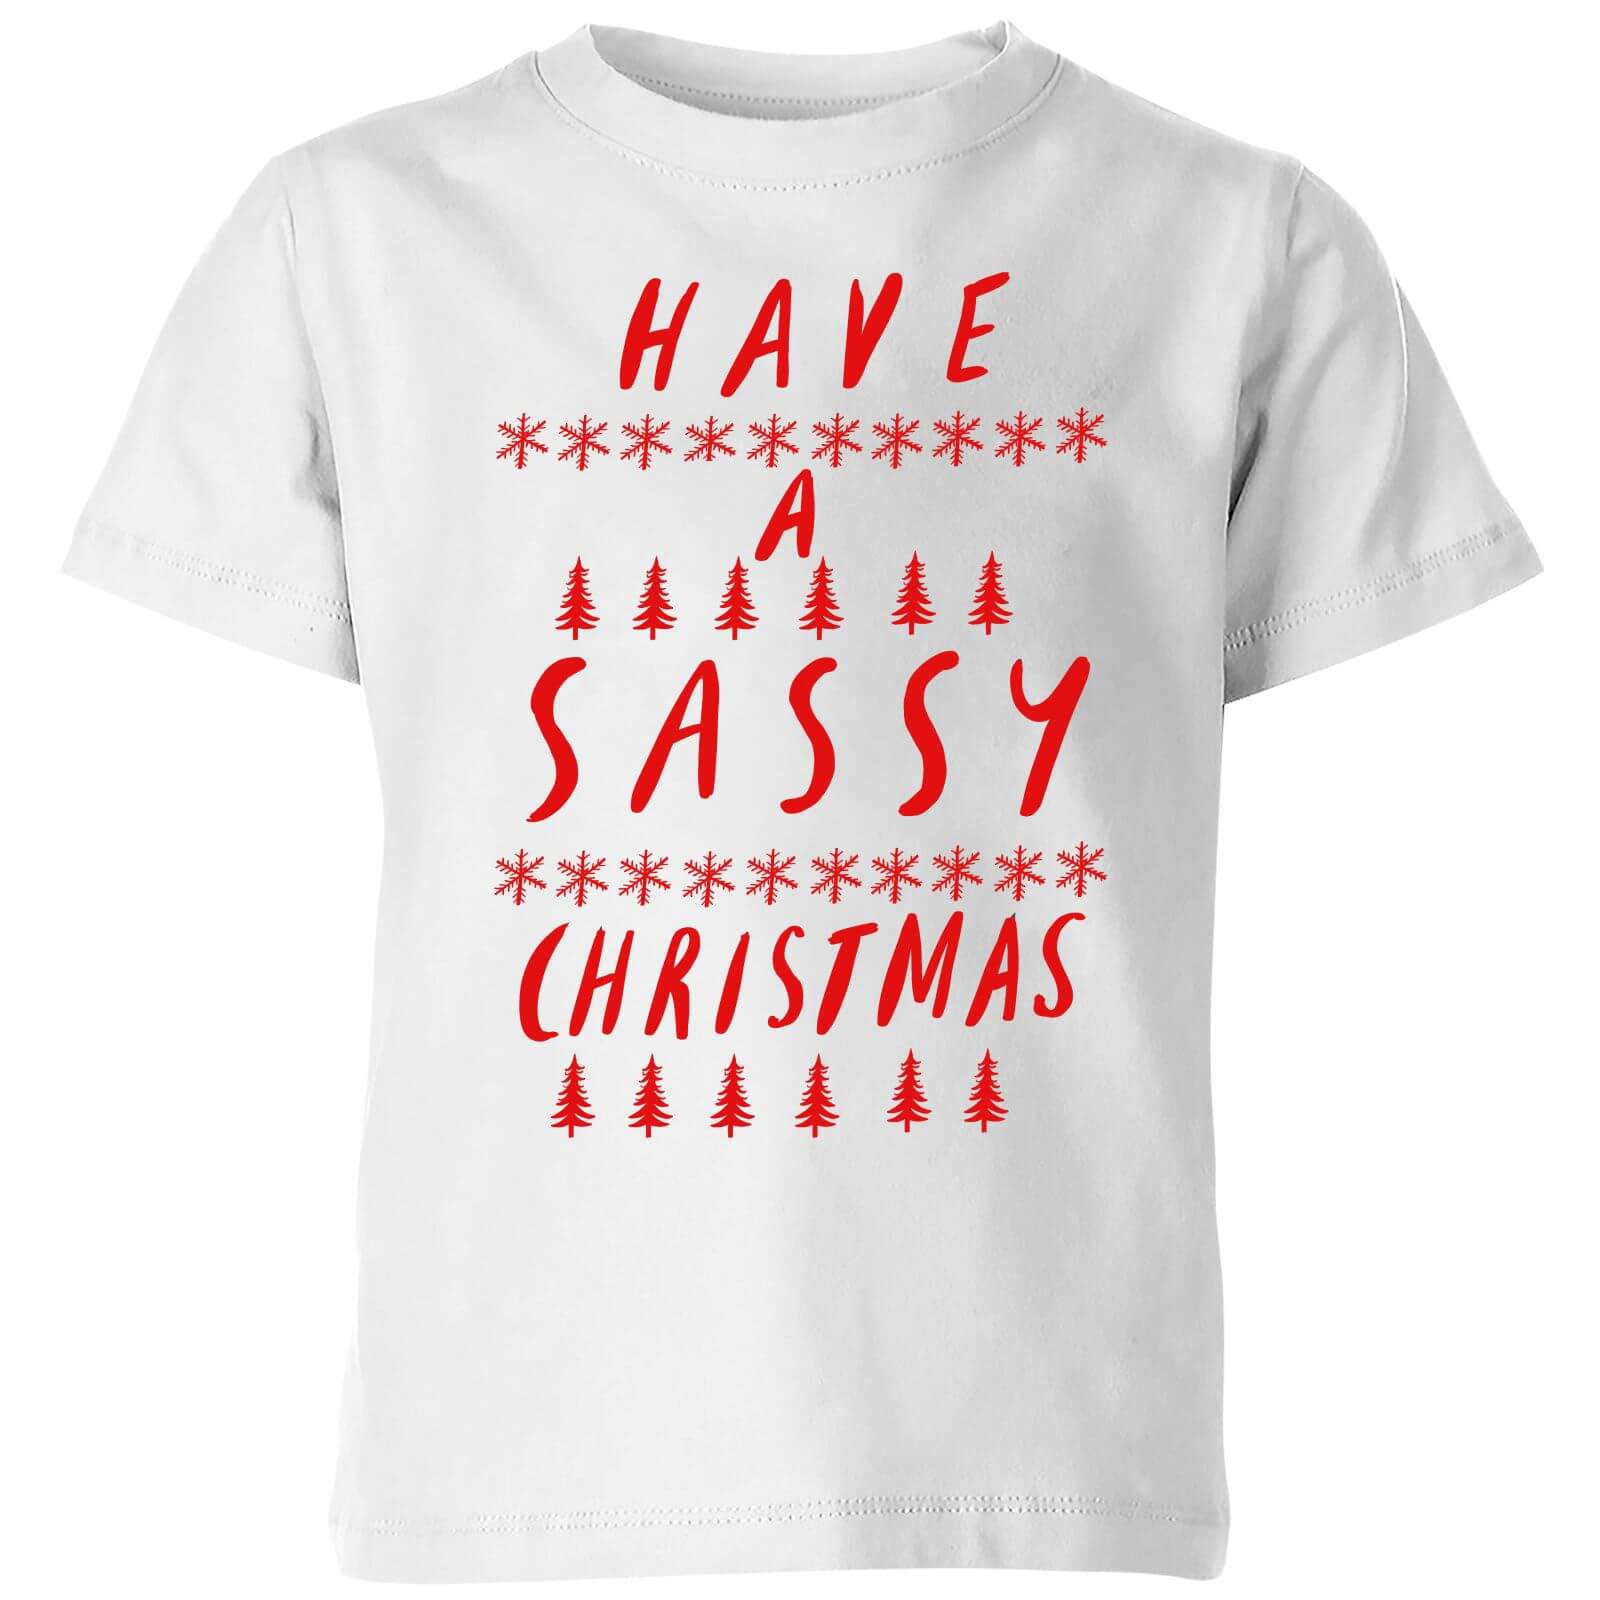 Have A Sassy Christmas Kids' T-Shirt - White - 3-4 Years - White